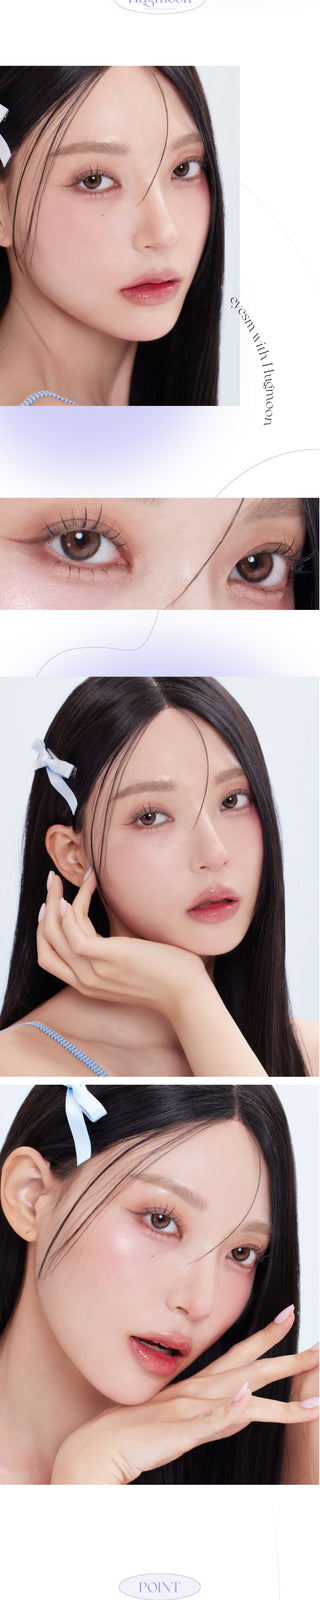 The Eyesm Hugmoon 1-Day Brown (10pk) contact lens hue from different perspectives on a model. different close-ups of eyes with the colour lens, displaying the subtle but natural change on dark brown, natural brown, and light brown eyes.